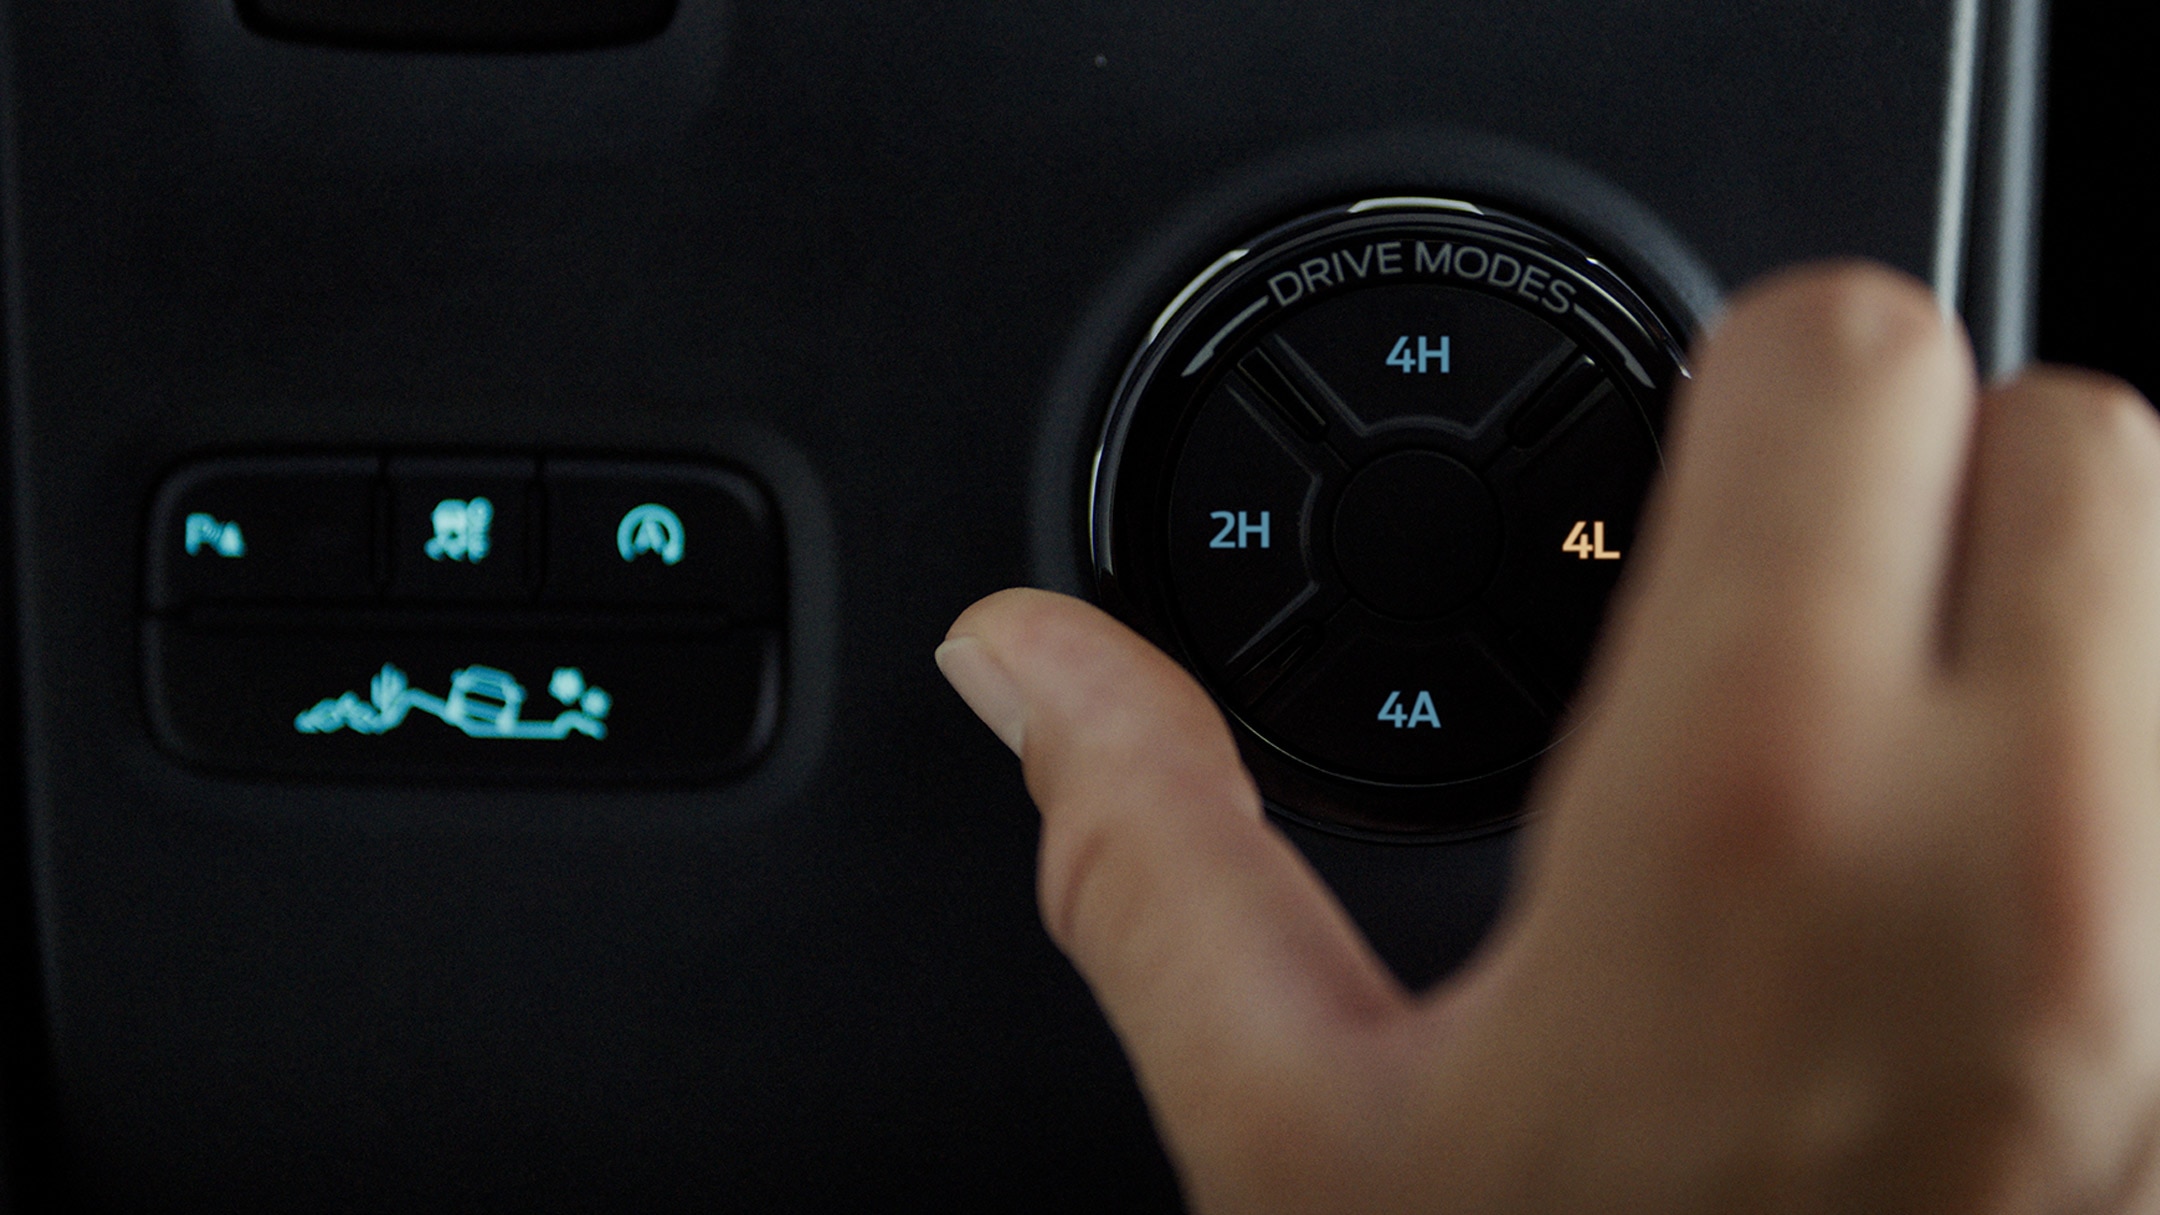 All-New Ford Ranger drive mode